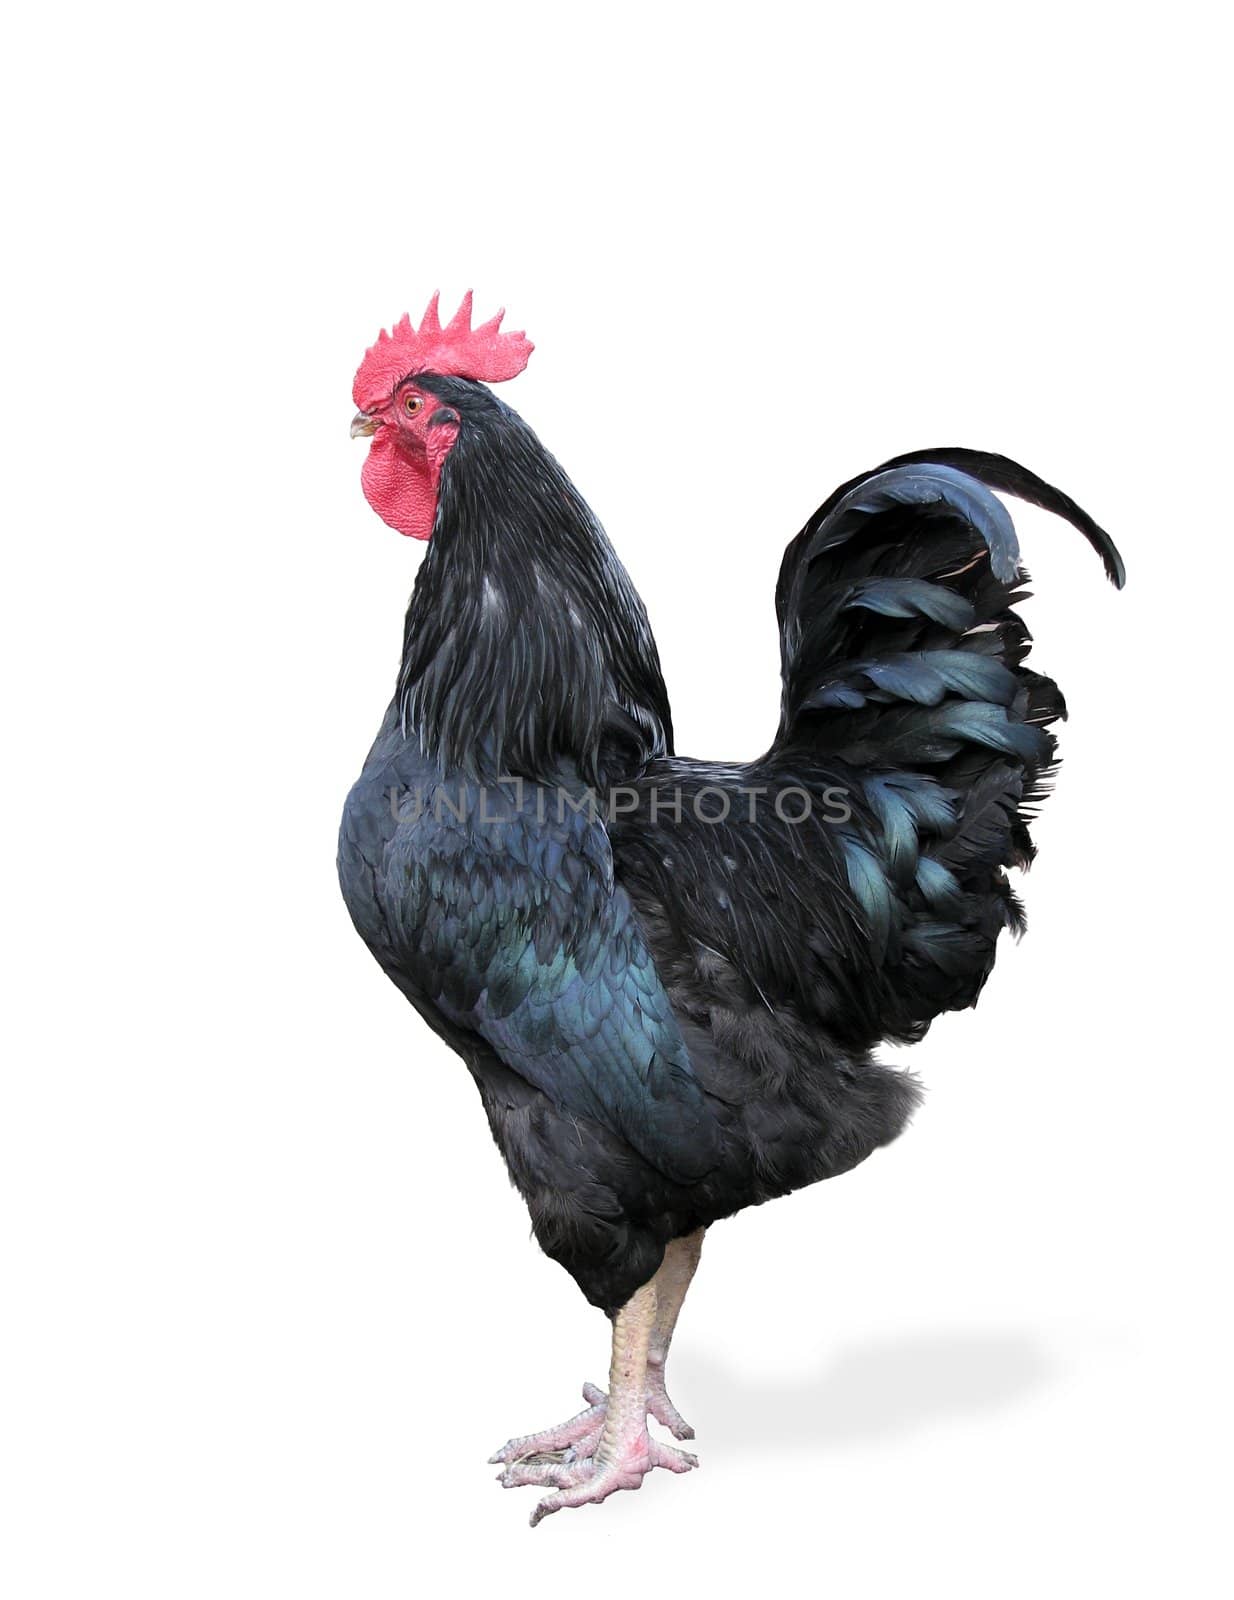 The black rooster on a white background. It is isolated on white